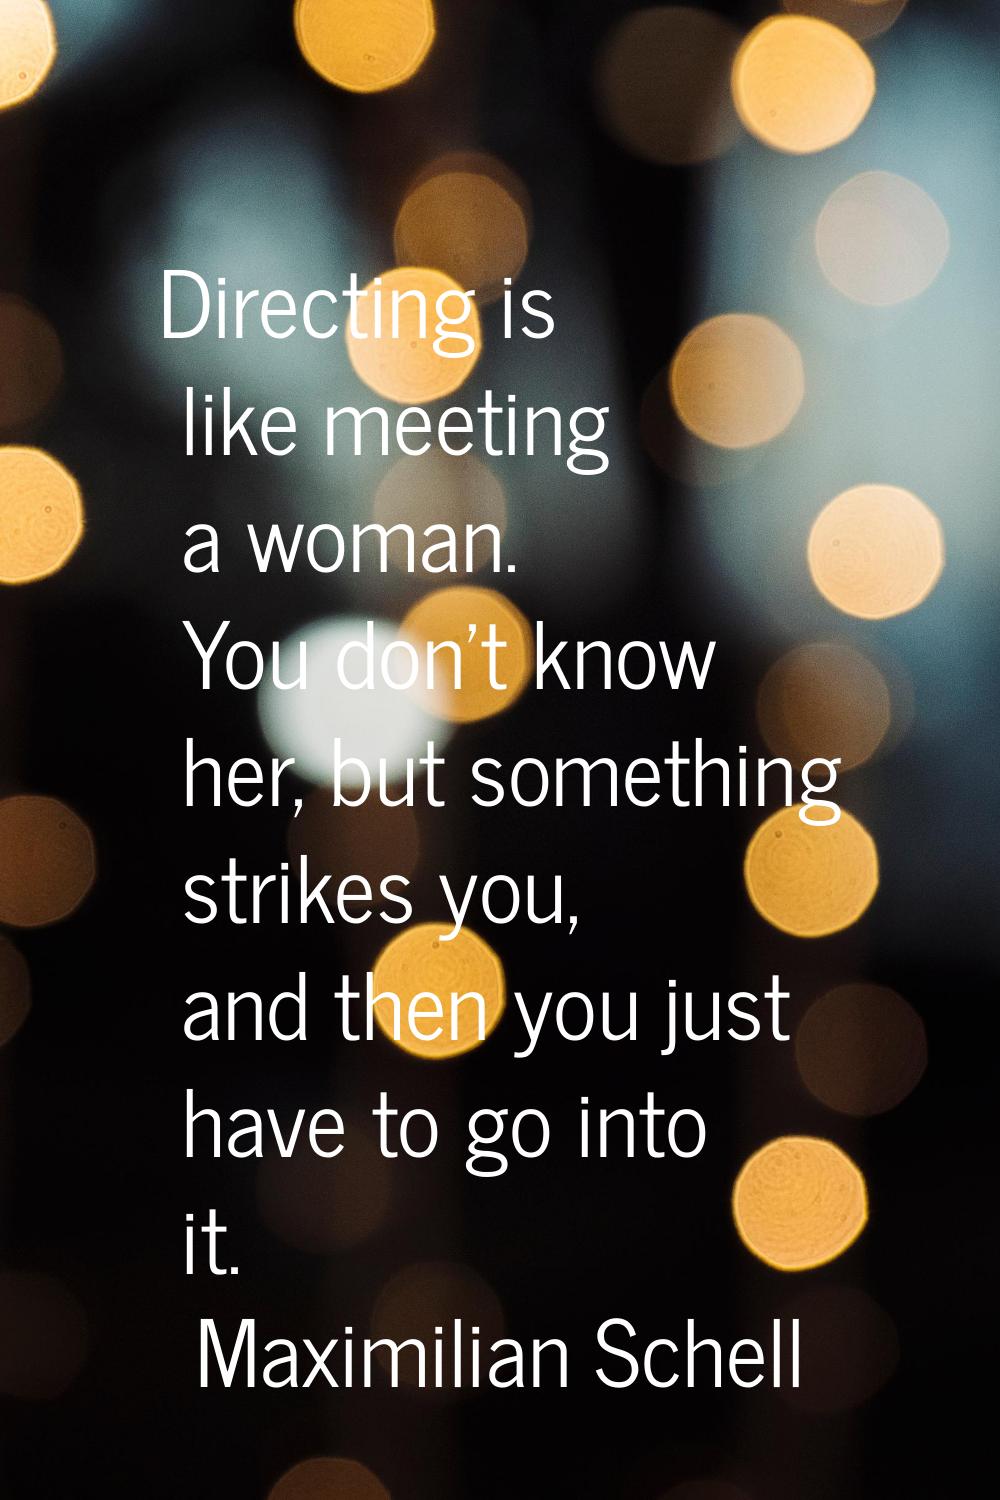 Directing is like meeting a woman. You don't know her, but something strikes you, and then you just